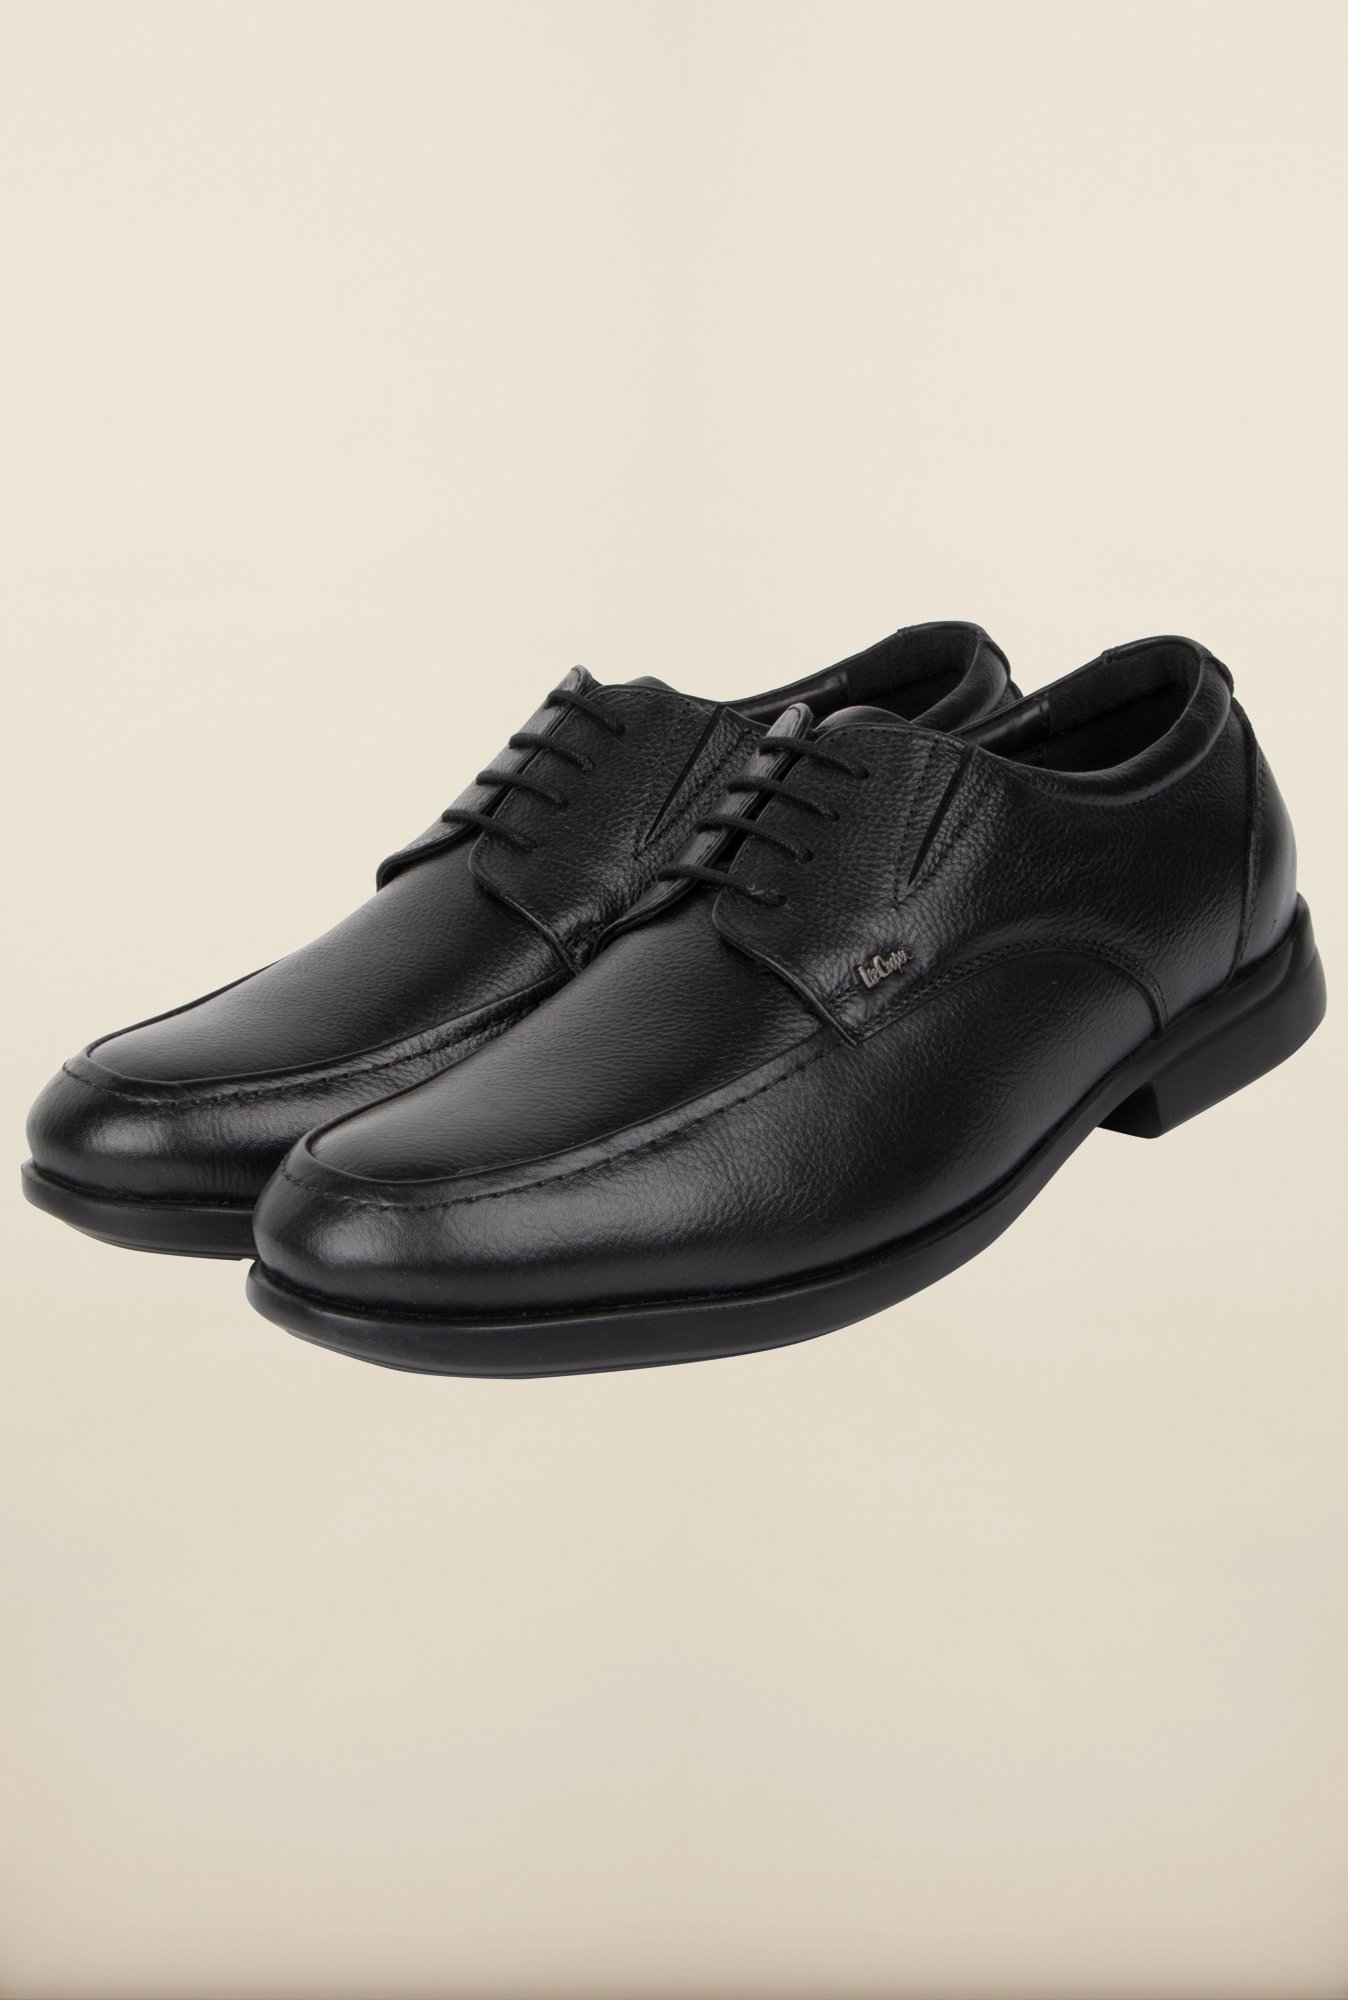 lee cooper leather shoes without laces